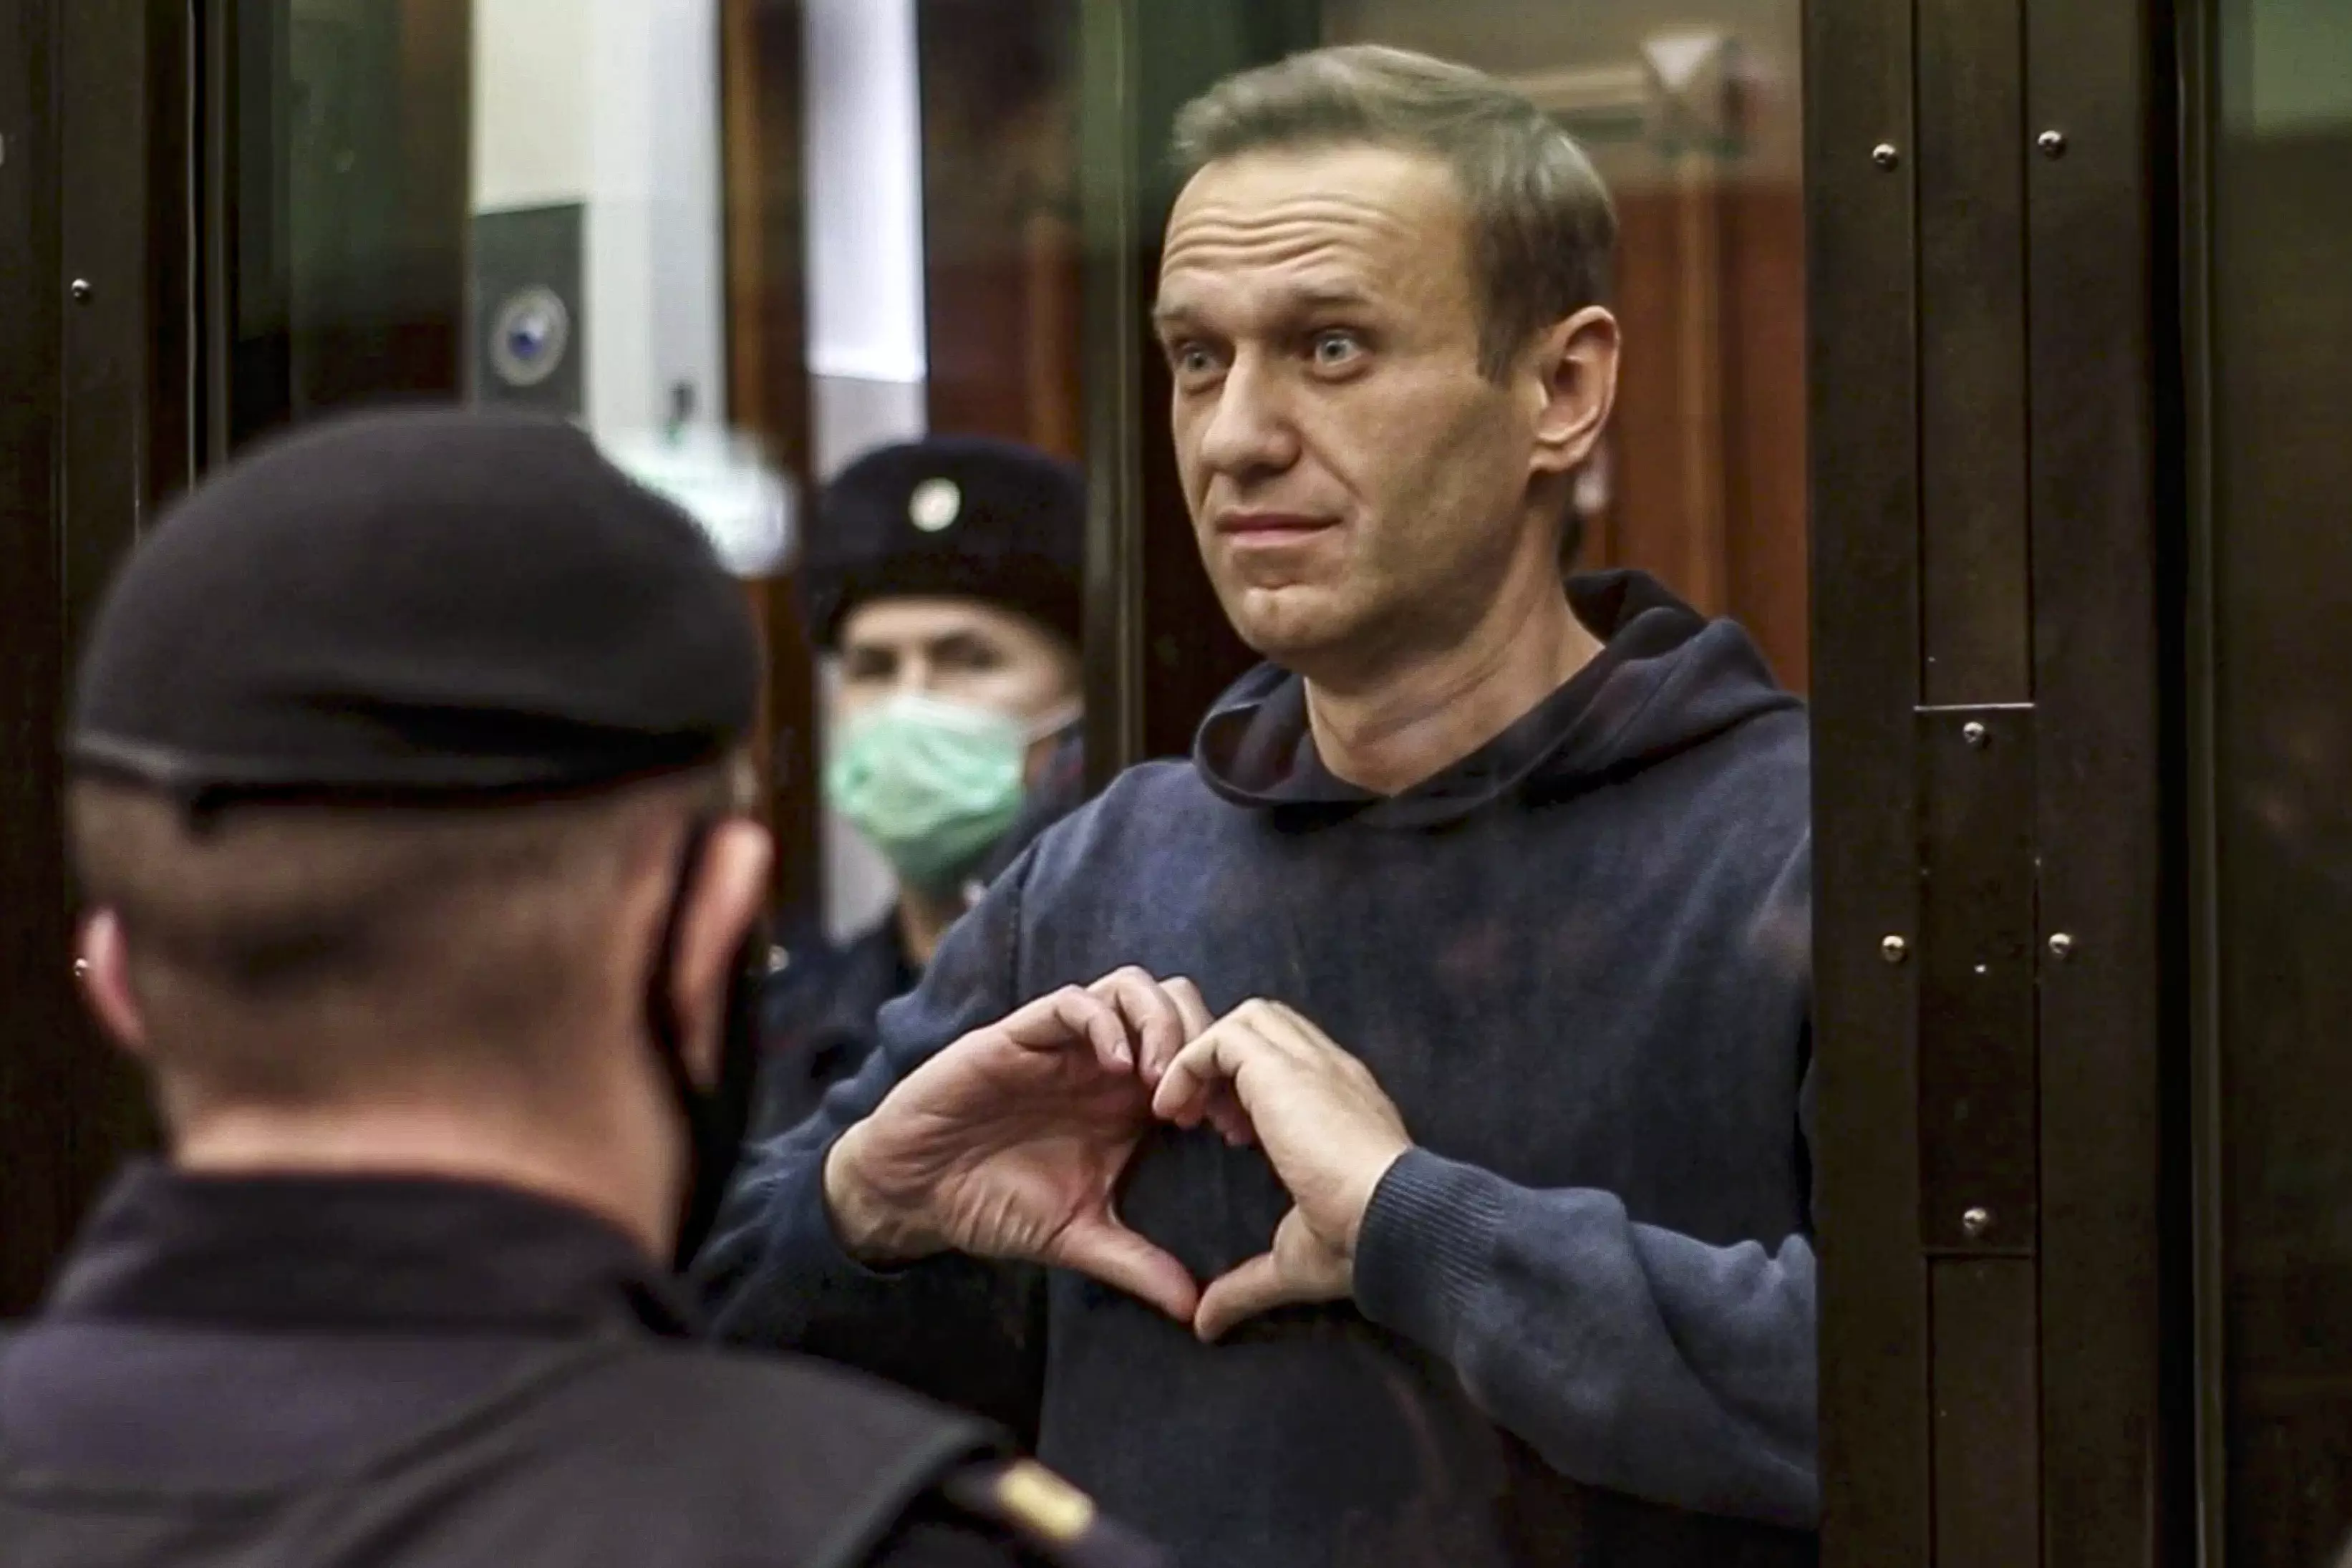 Alexei Navalny was sentenced to over three years in prison.